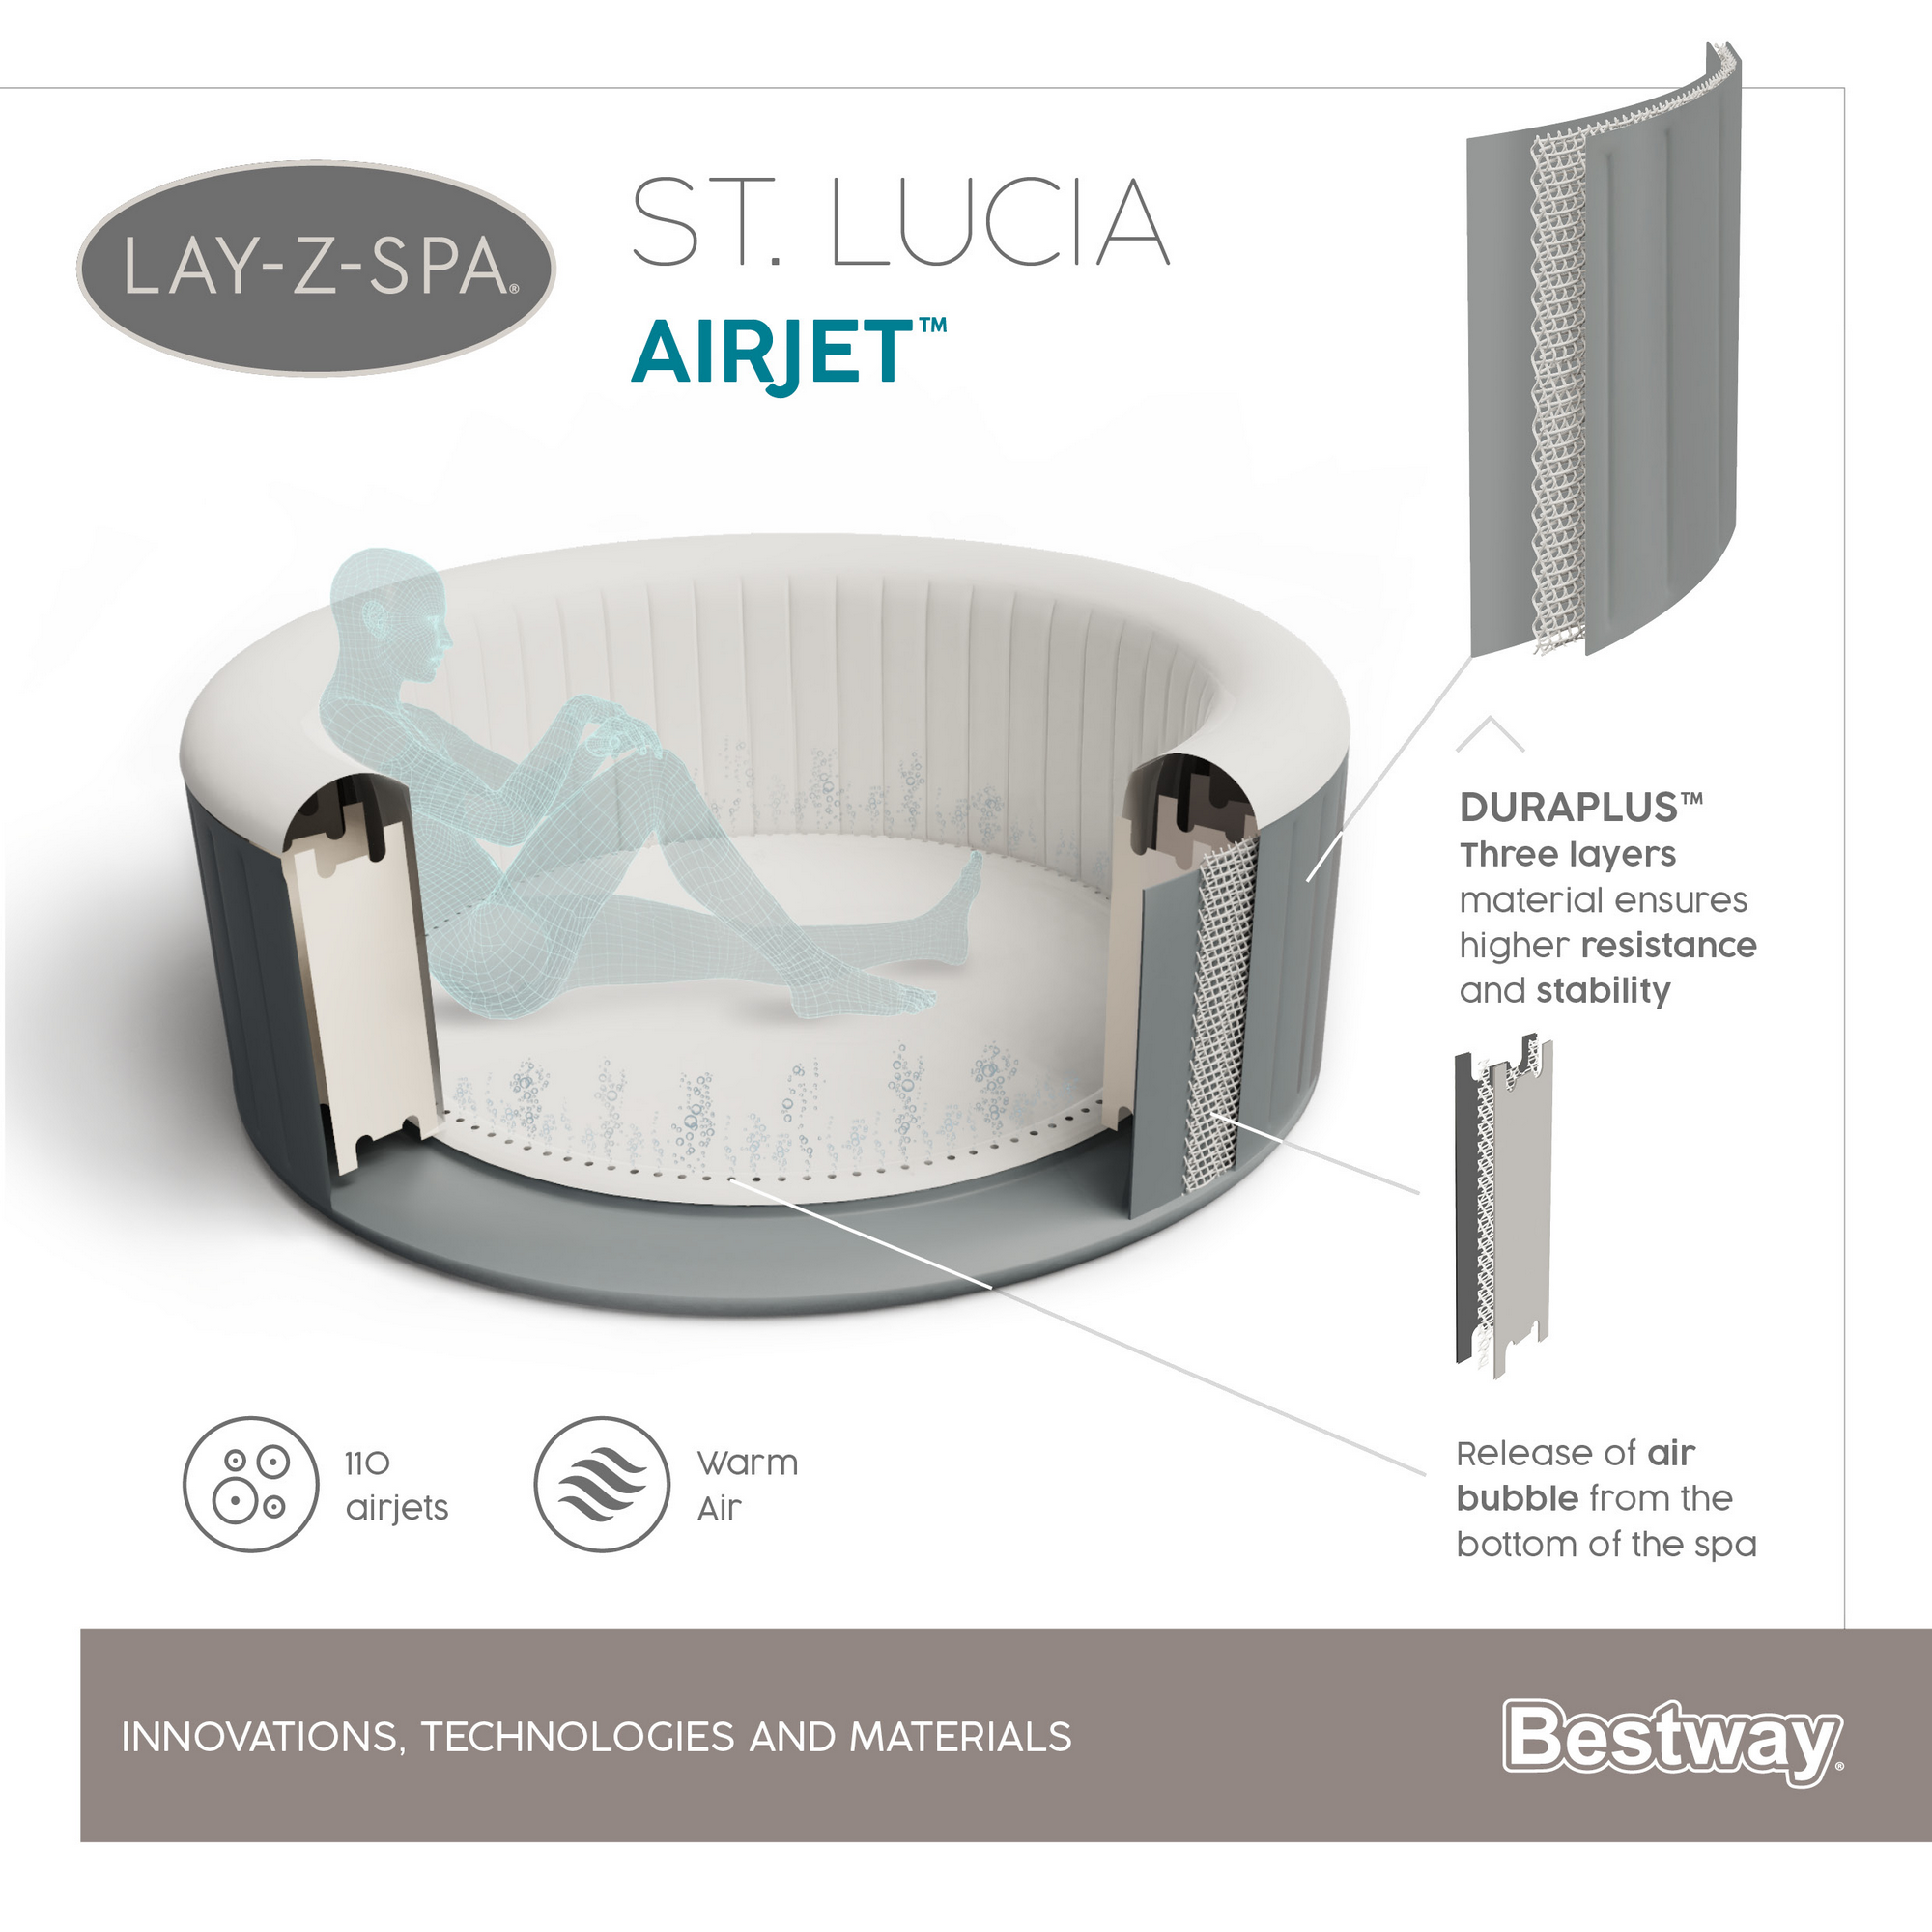 Whirlpool 'Lay-Z-Spa™ St. Lucia AirJet' silbergrau/weiß Ø 170 x 66 cm + product picture